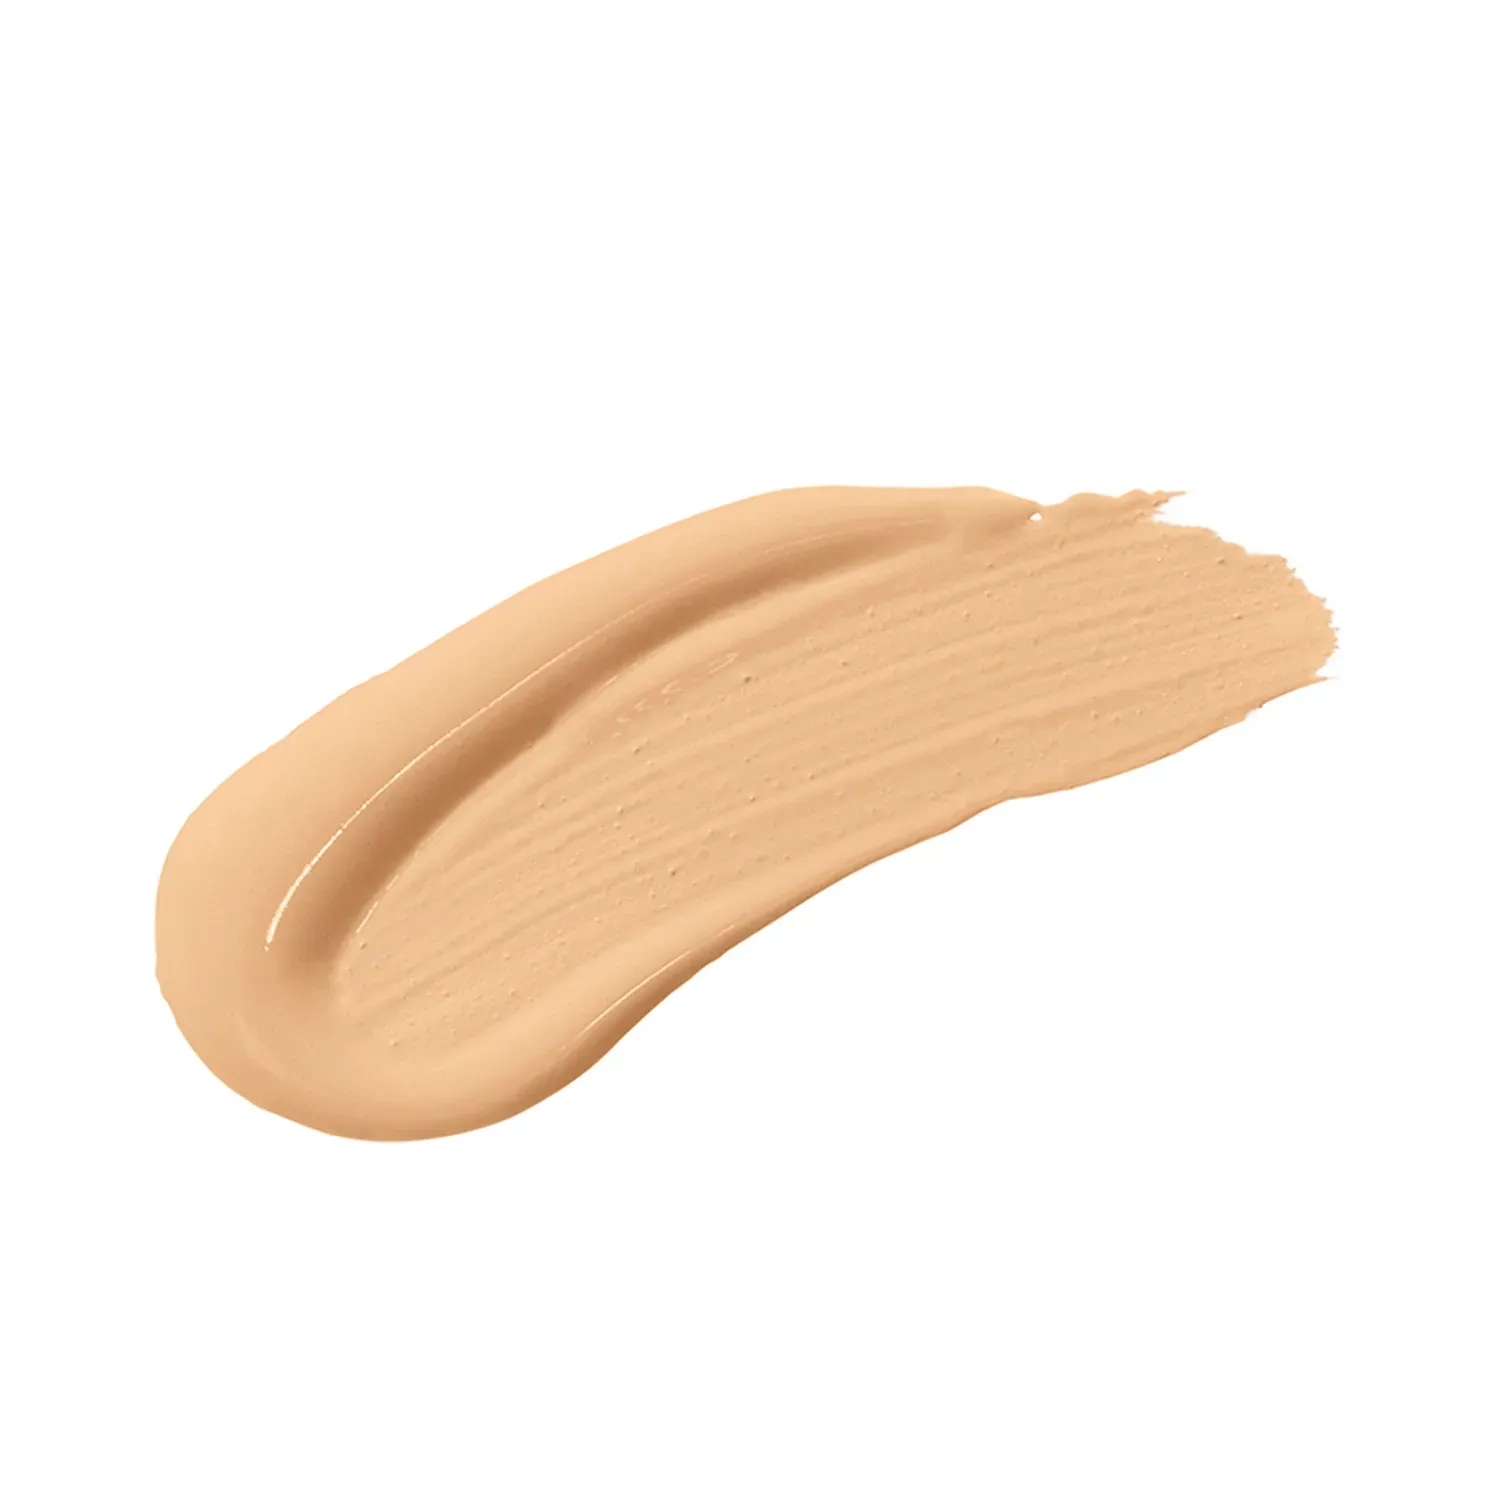 By Terry | By Terry Light Expert Click Brush Foundation - N4.5 Soft Beige (19.5ml)